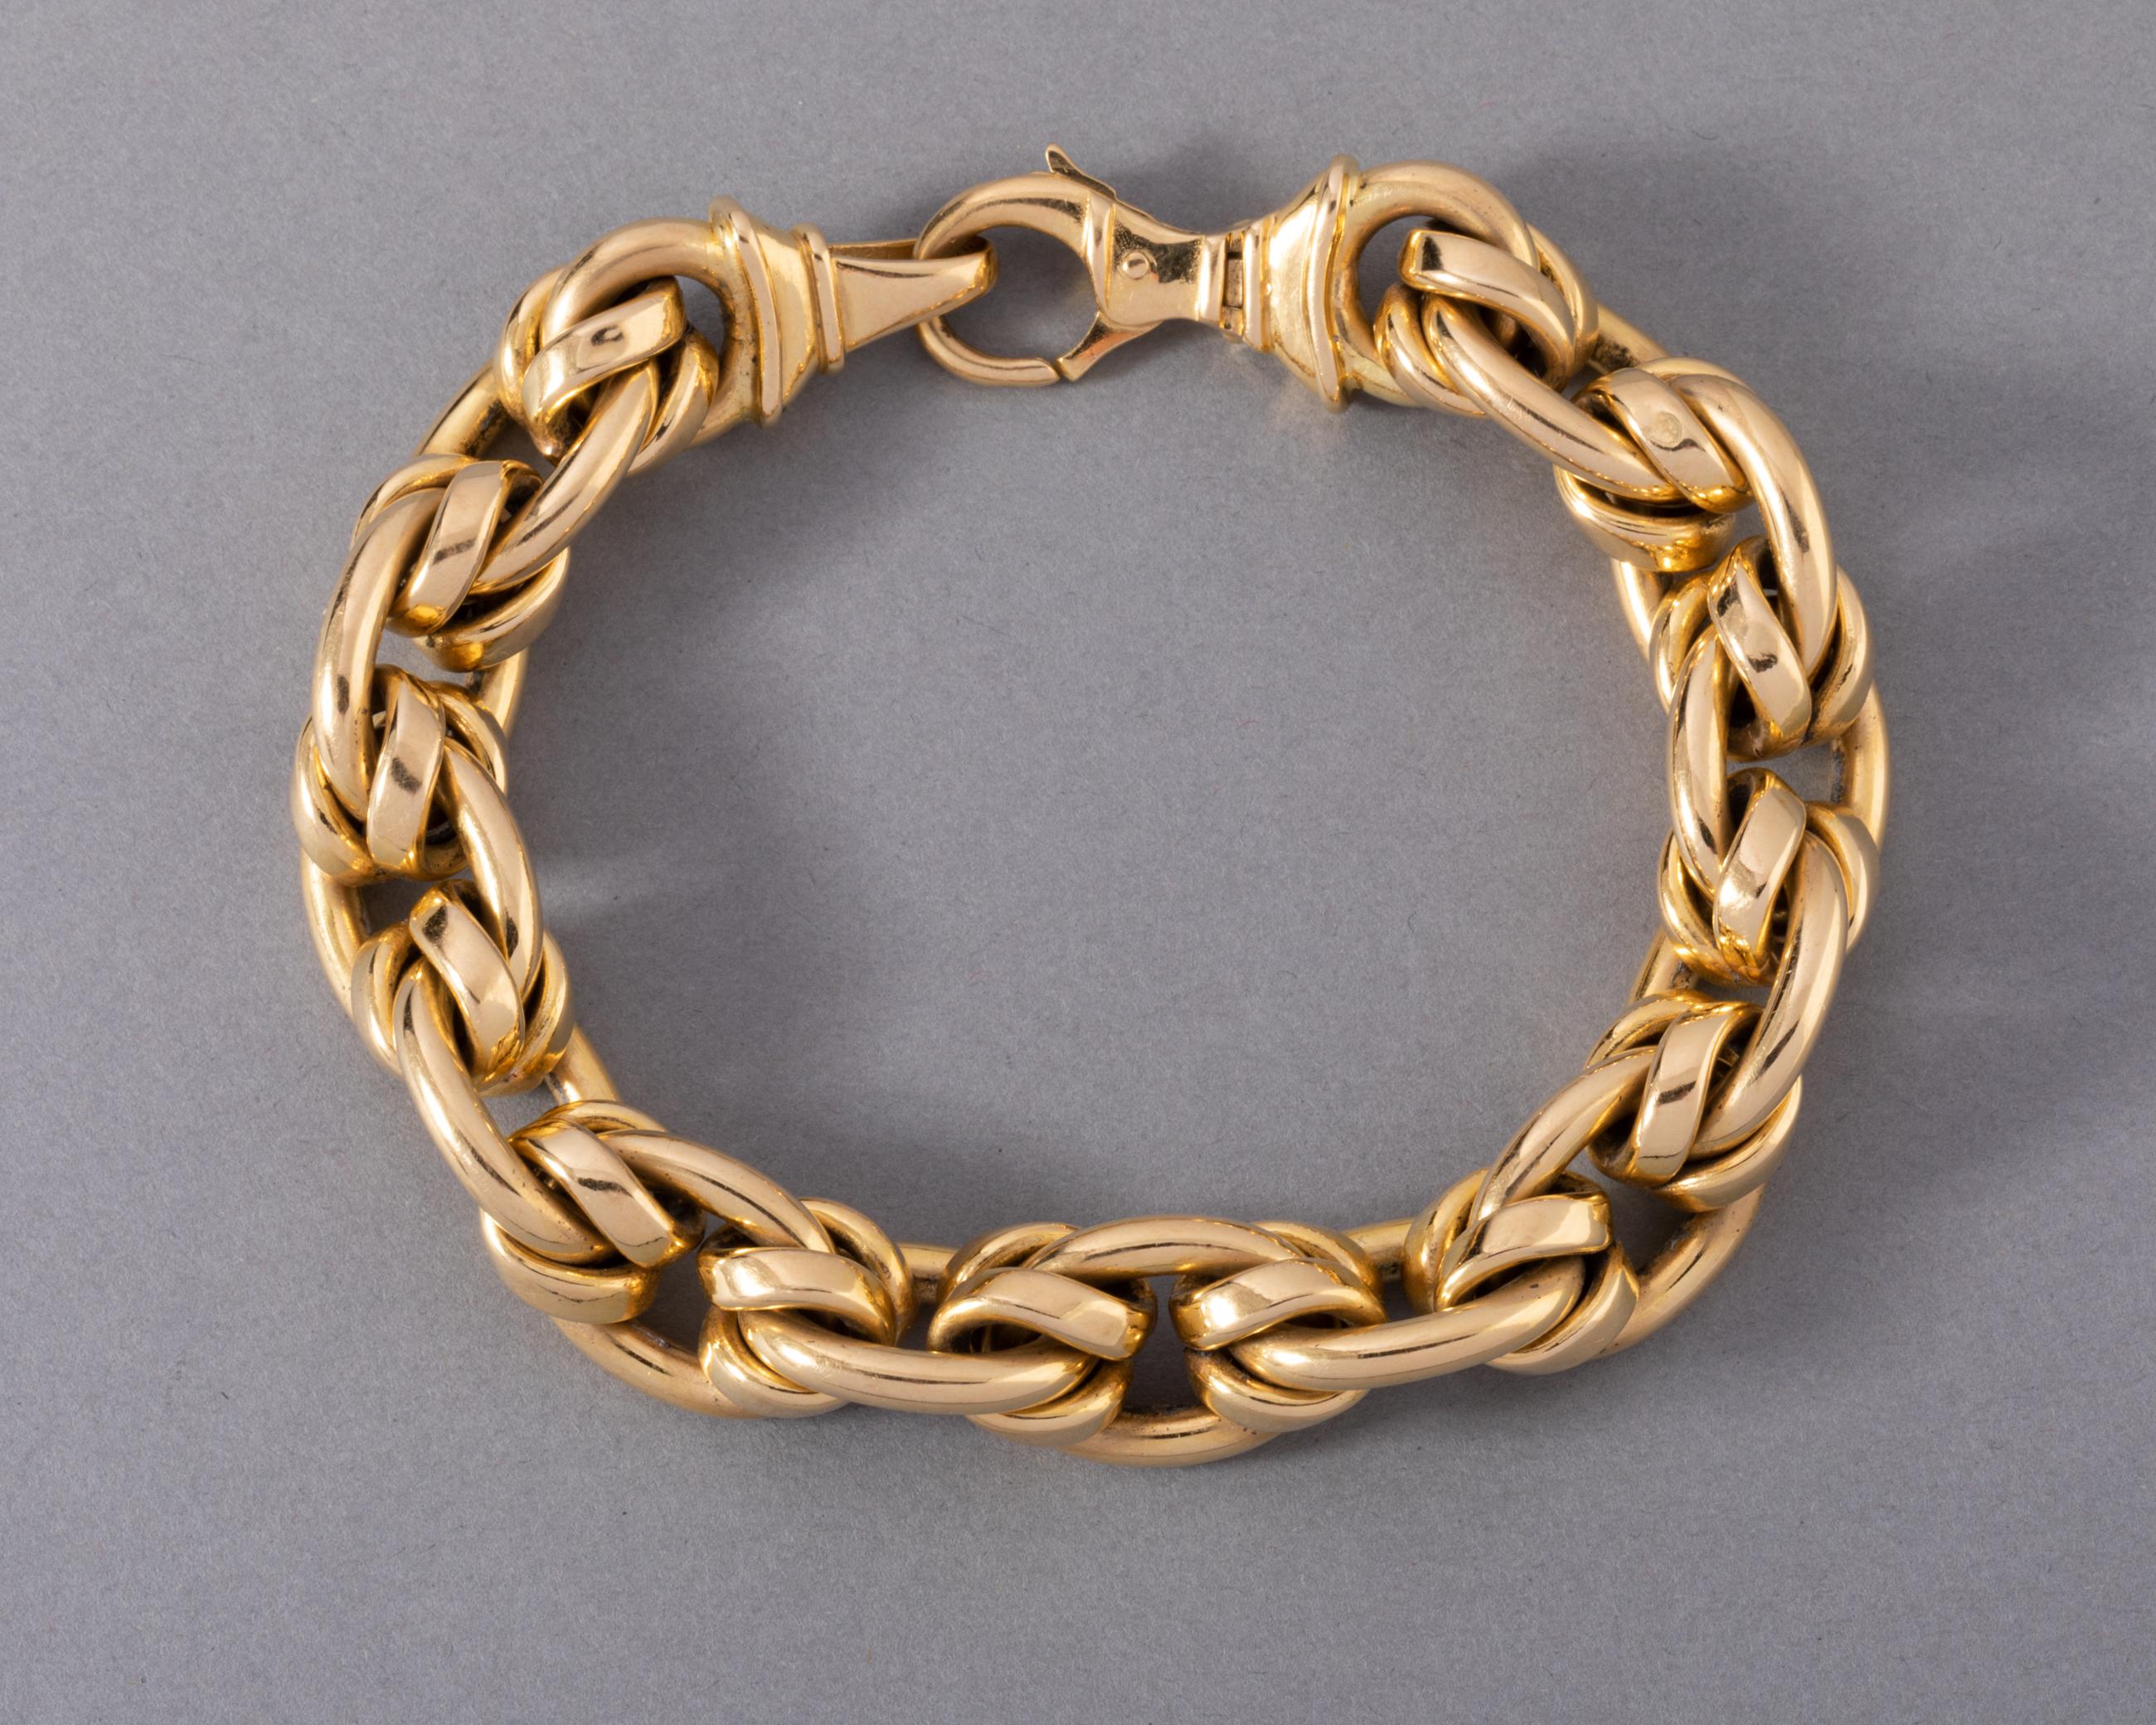 One lovely vintage bracelet, french made circa 1980.
Hallmarks for gold (eagle head), mark of maker(Unknown).
Length: 18.5 cm
12mm width, it has presence.
Total weight: 31 grams.

